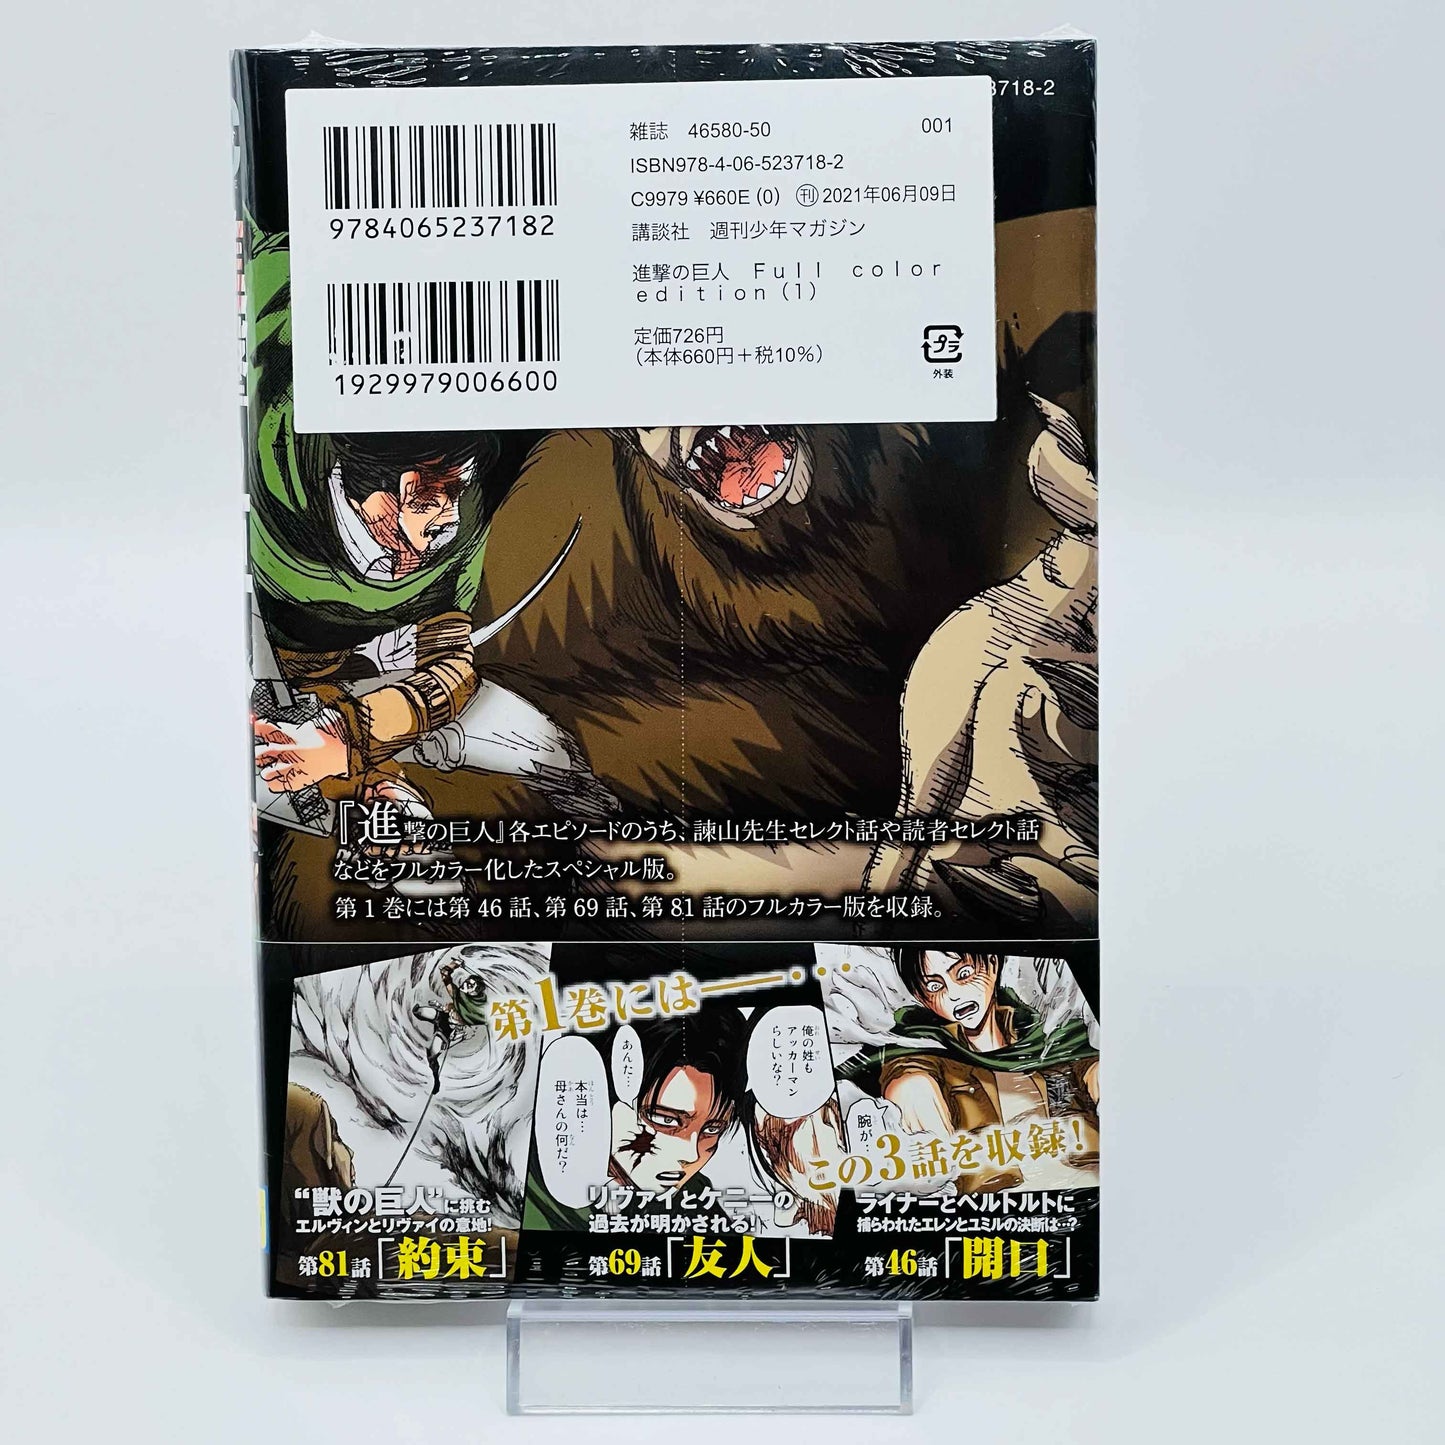 Attack on Titan (Full Color Edition - New Sealed) - Volume 01 - 1stPrint.net - 1st First Print Edition Manga Store - M-AOTCOLOR-01-005